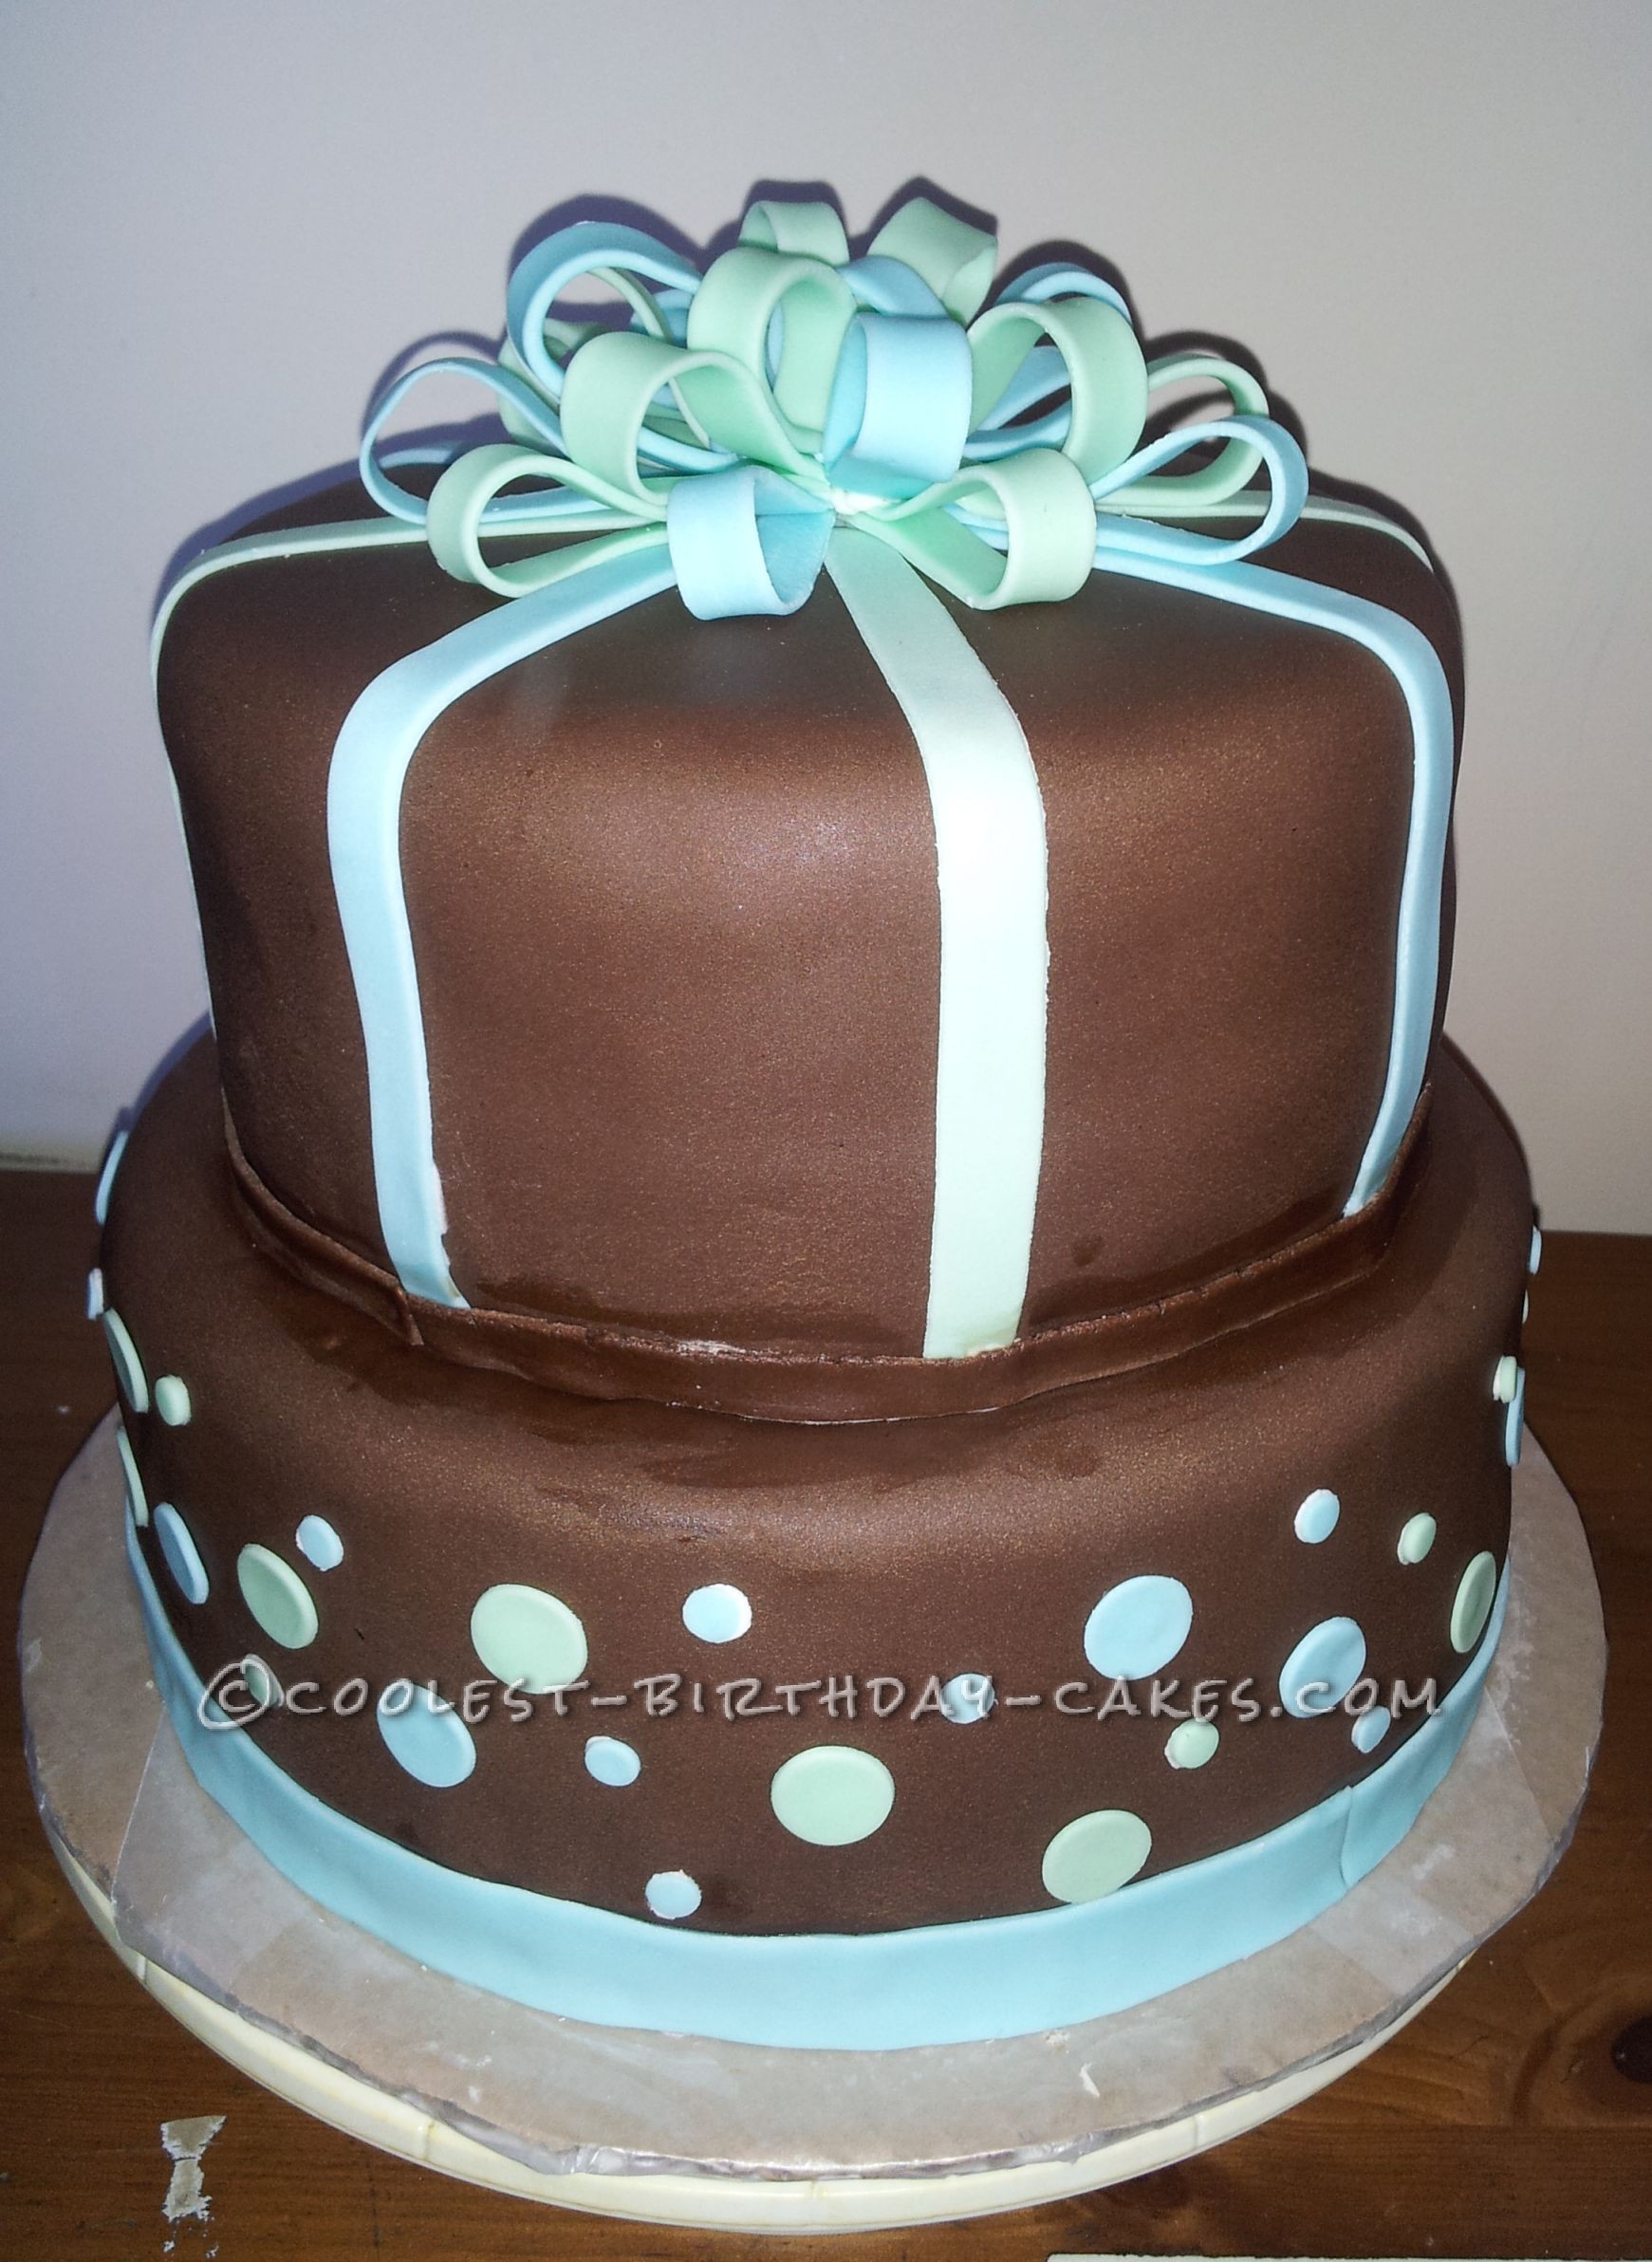 Simple Ribbon Cake for Baby Boy Shower